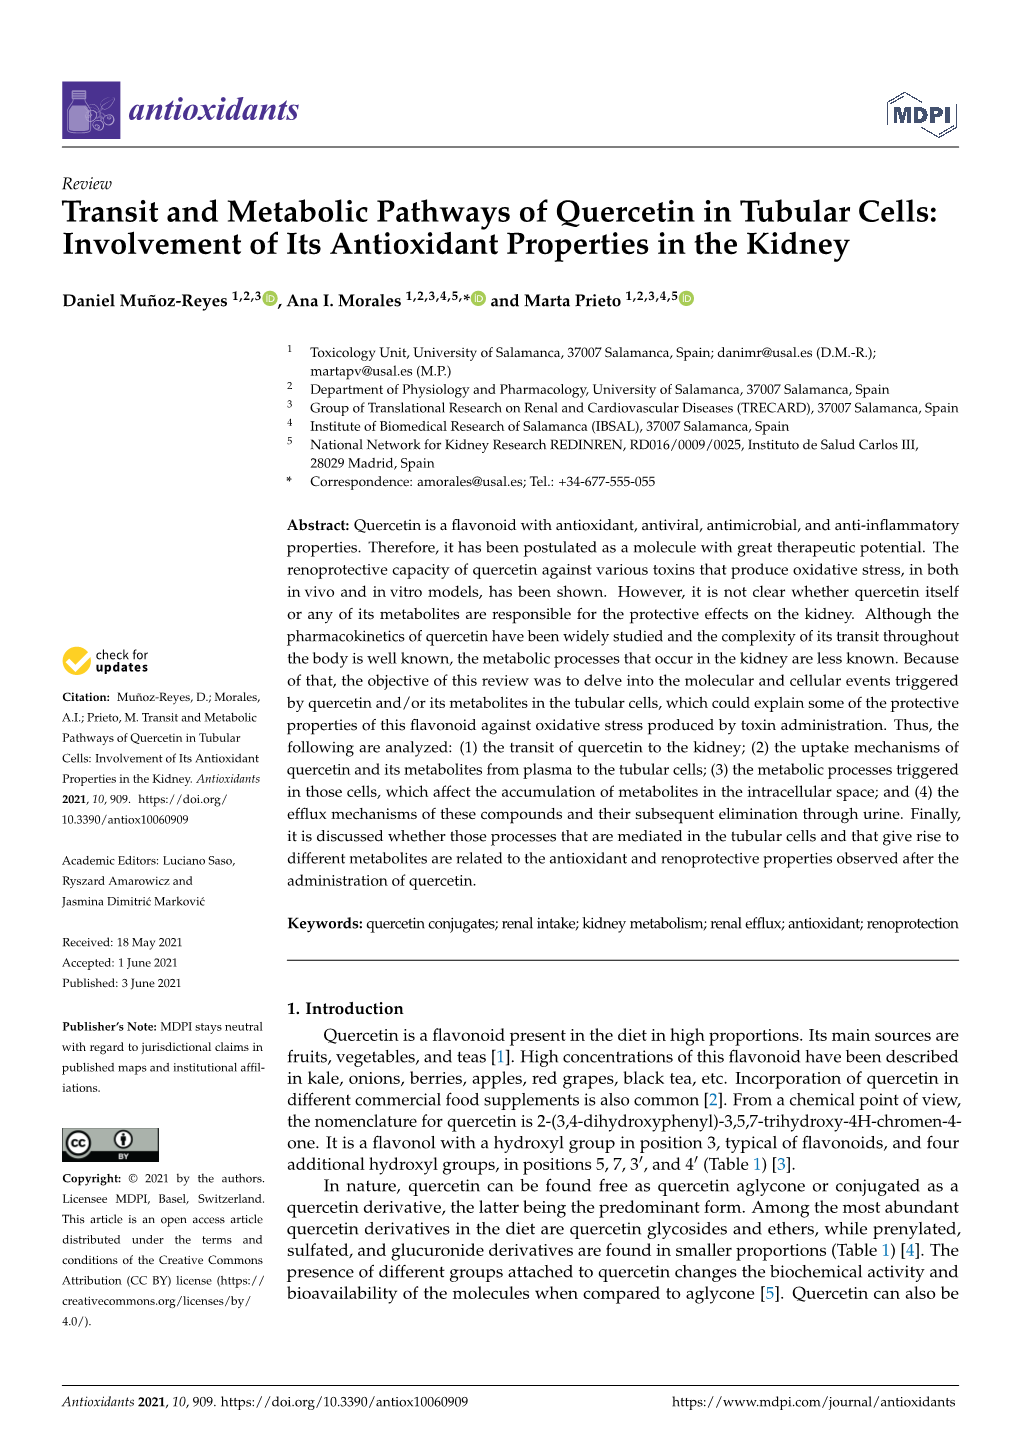 Transit and Metabolic Pathways of Quercetin in Tubular Cells: Involvement of Its Antioxidant Properties in the Kidney